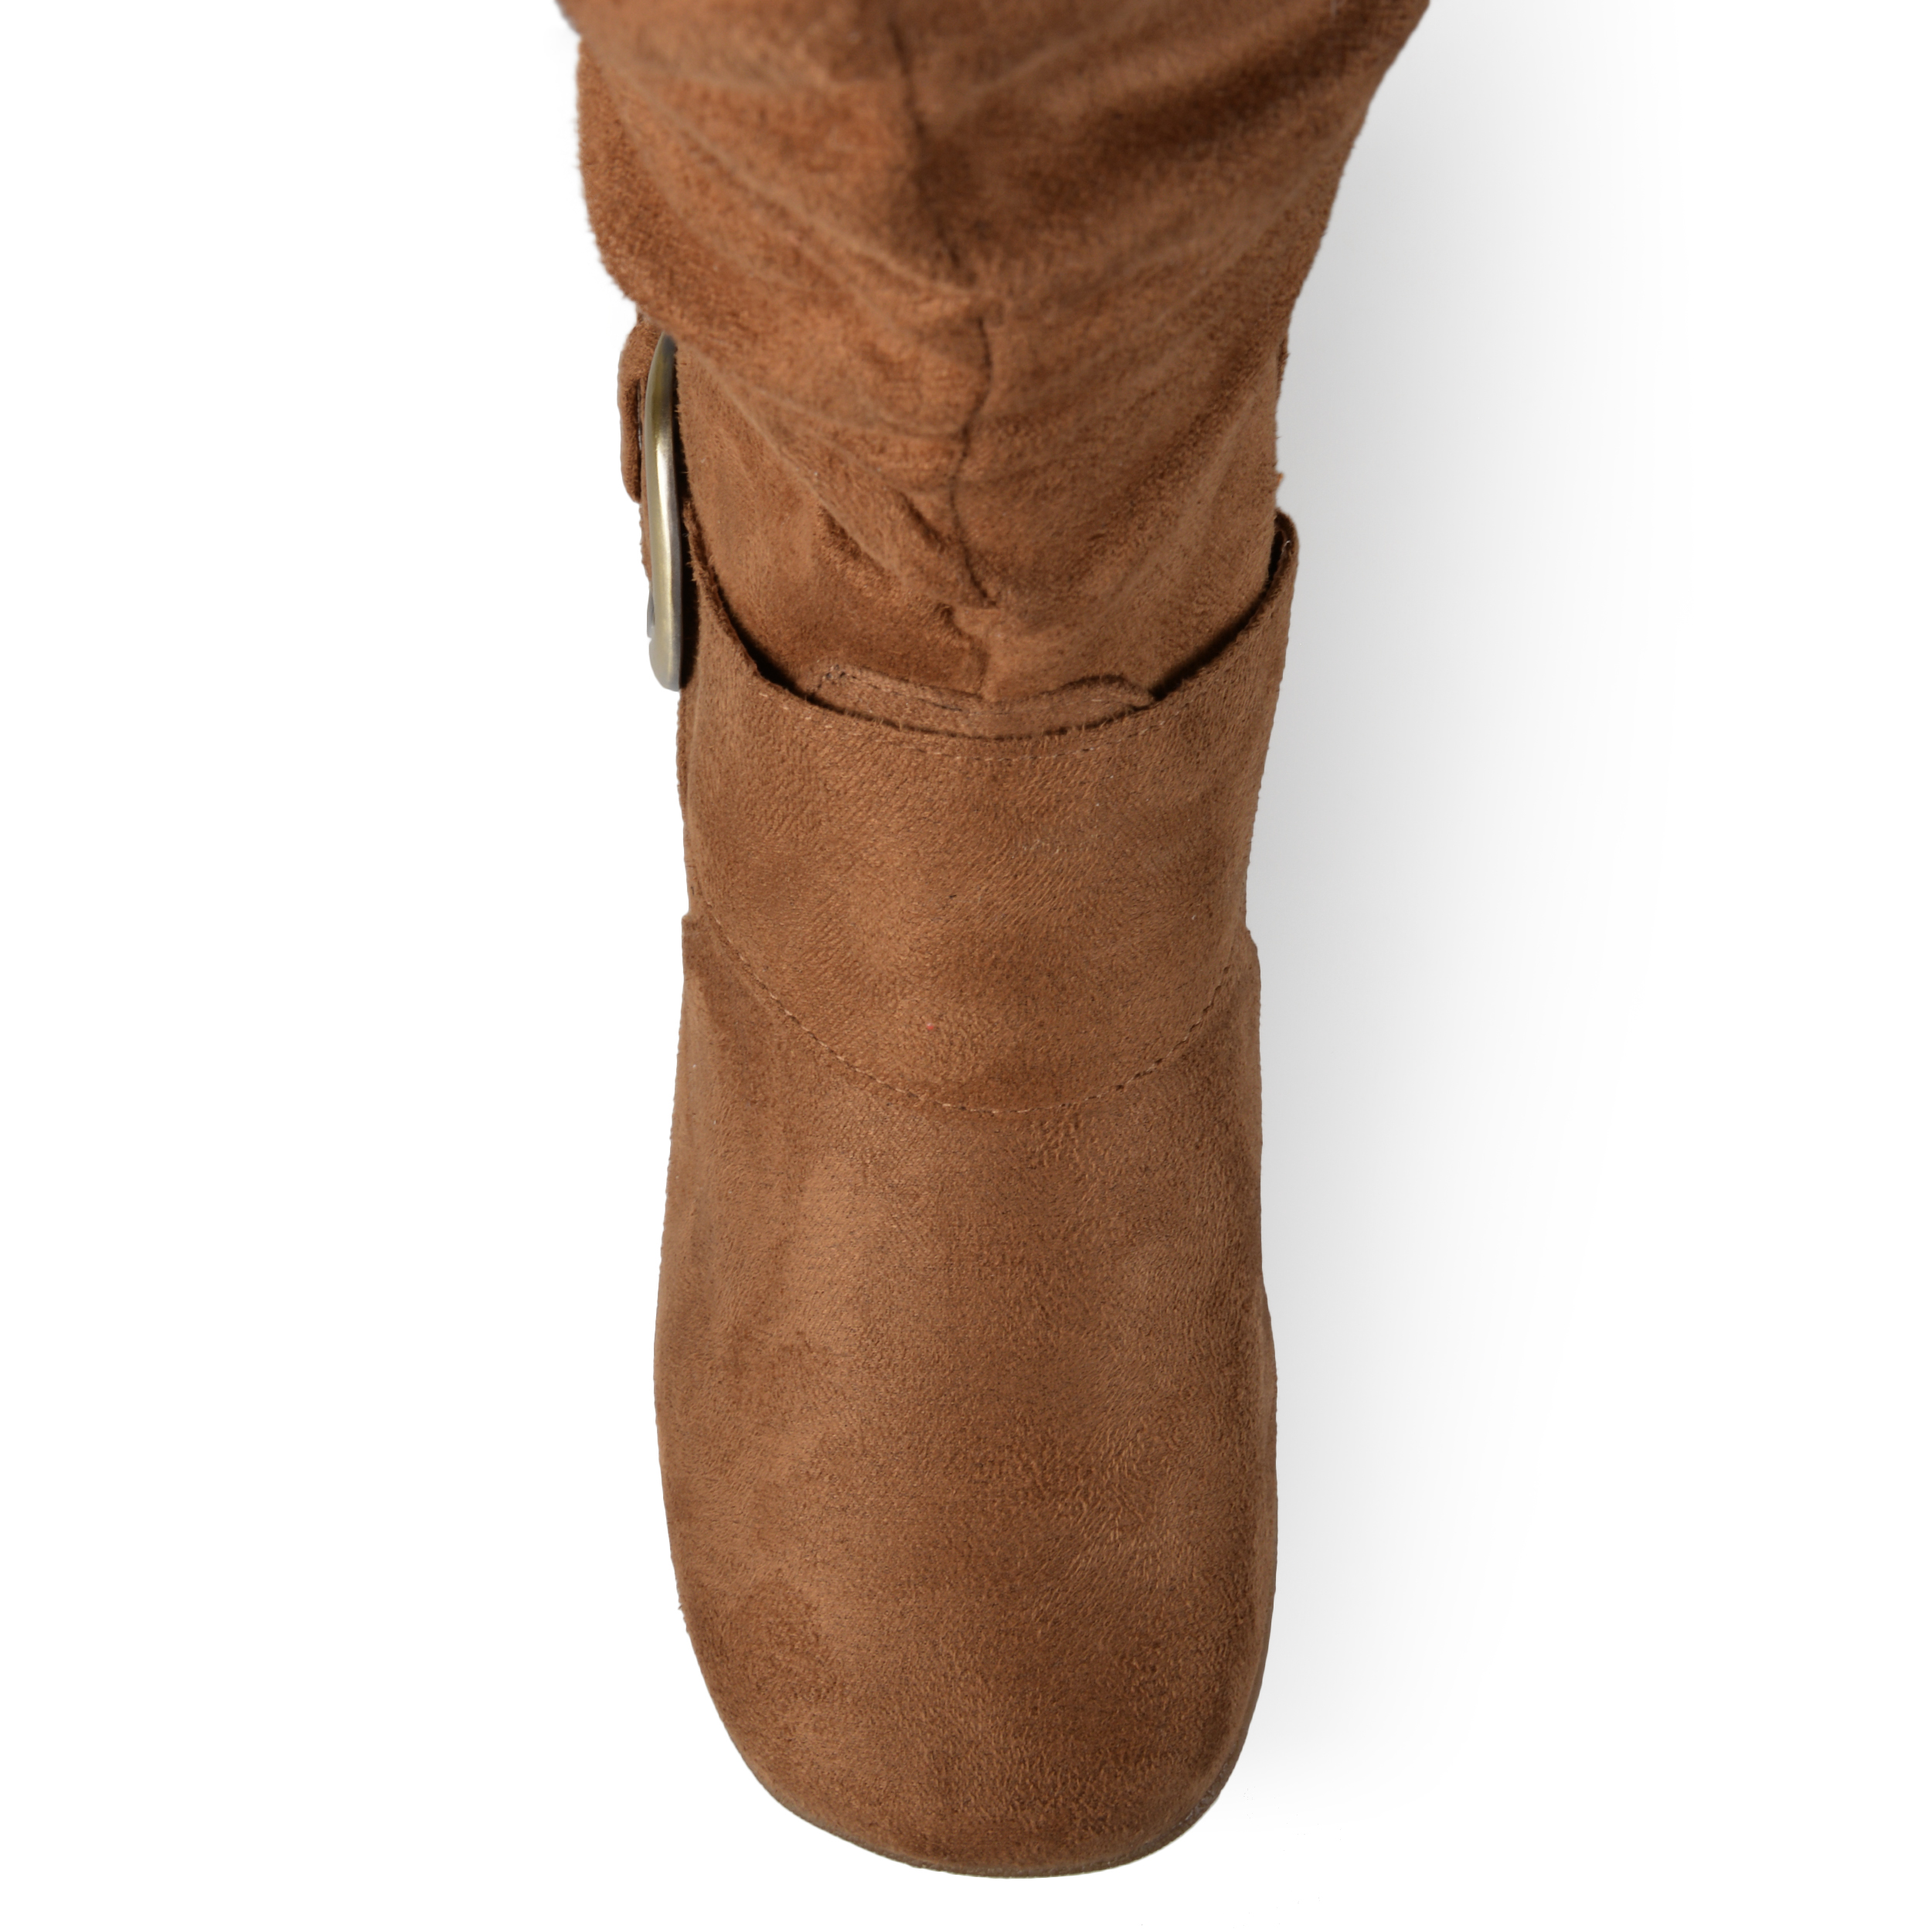 Brinley Co. Womens Wide Calf Dress Boot - image 5 of 8